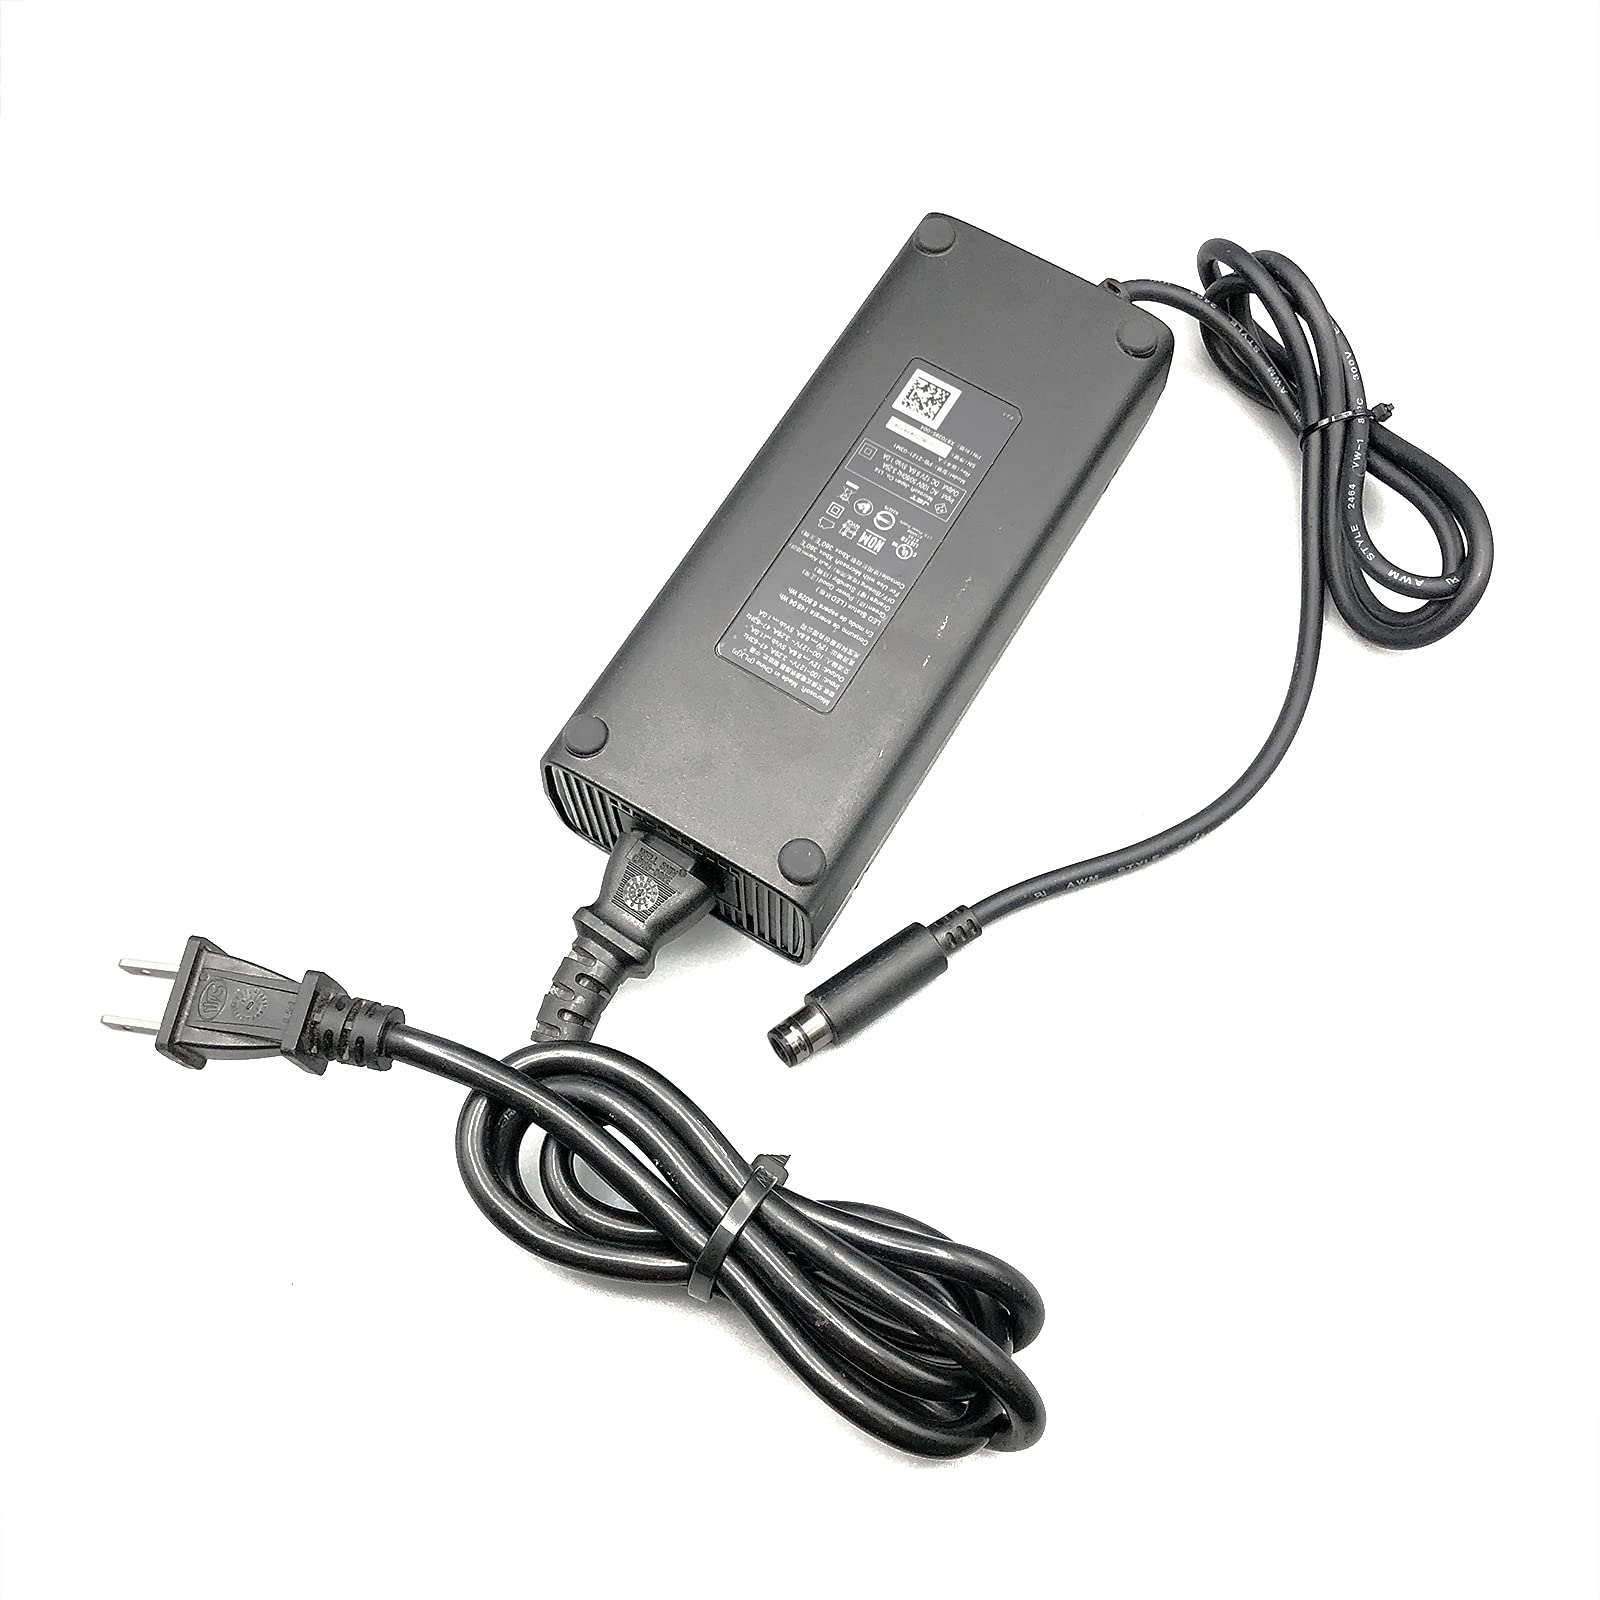 Power supply unit or power cord